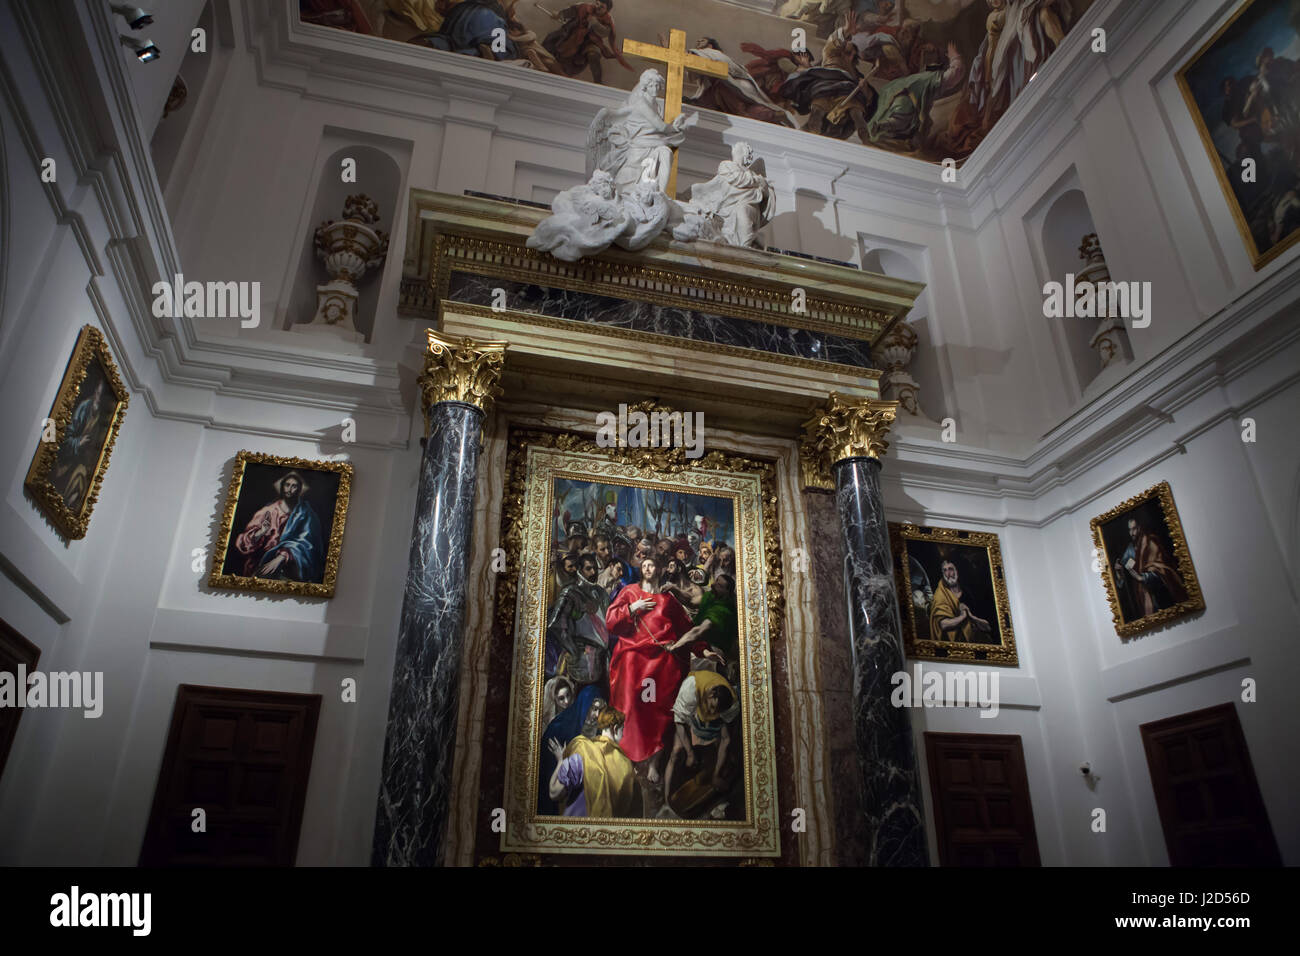 Painting 'Disrobing of Christ' ('El Expolio de Cristo') by Spanish mannerist painter El Greco (1577-1579) on display in the High Altar of the sacristy of the Toledo Cathedral in Toledo, Spain. Paintings 'Jesus Christ' (L) and 'Tears of Saint Peter' (R) also by El Greco (1605-1610) are displayed right and left. Other paintings by El Greco from the Apostolados series are displayed on the side walls. Stock Photo